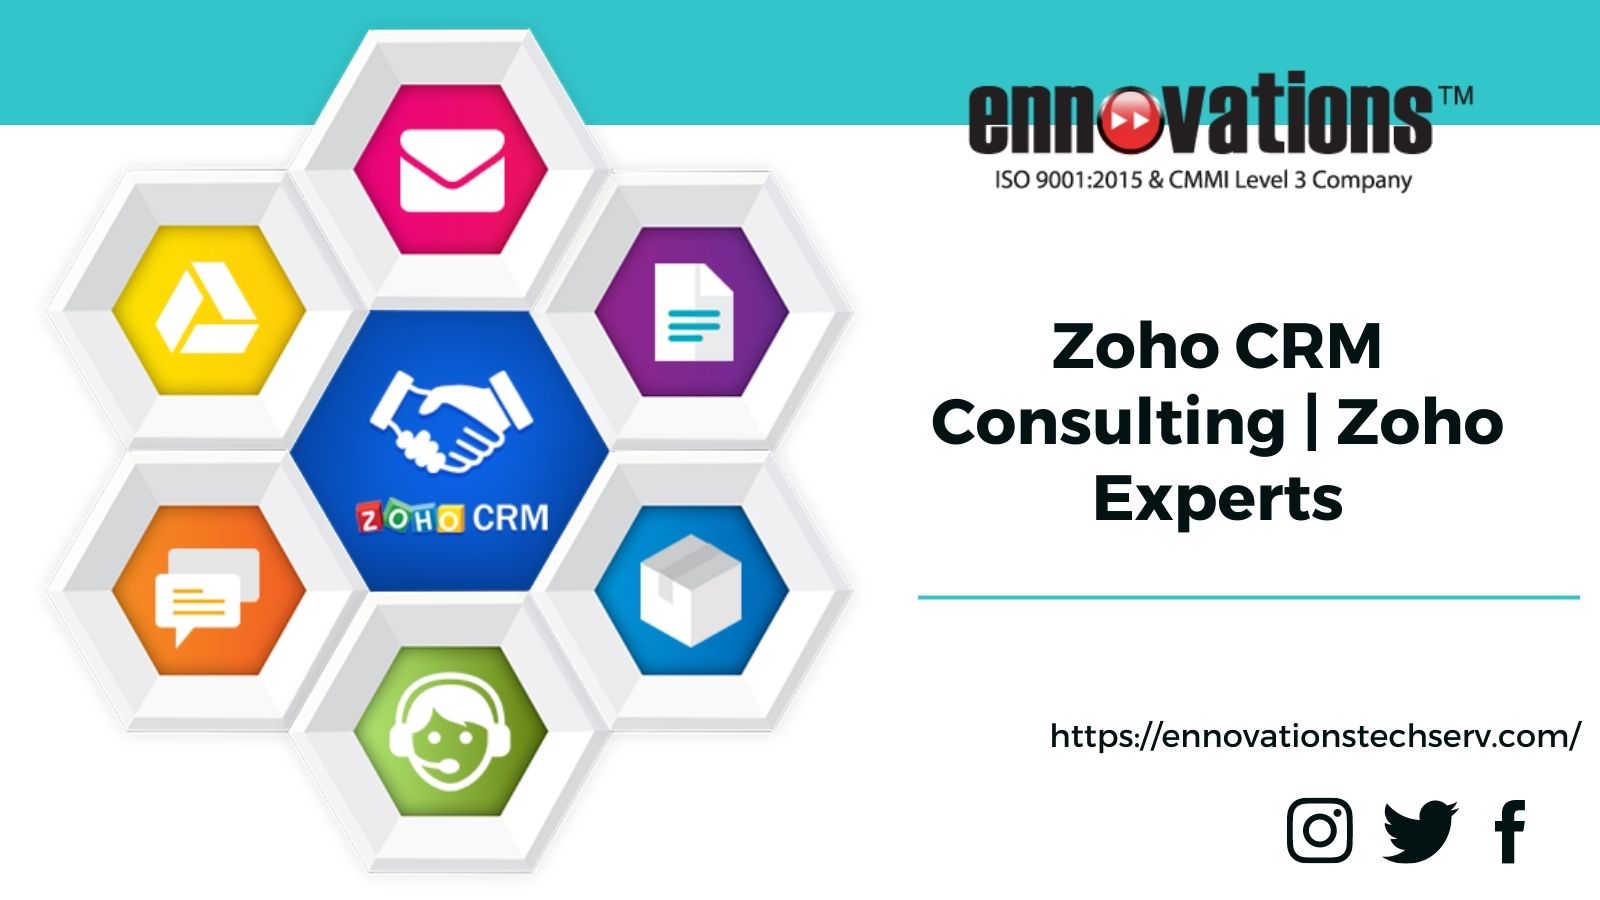 Zoho CRM Consulting Zoho Experts